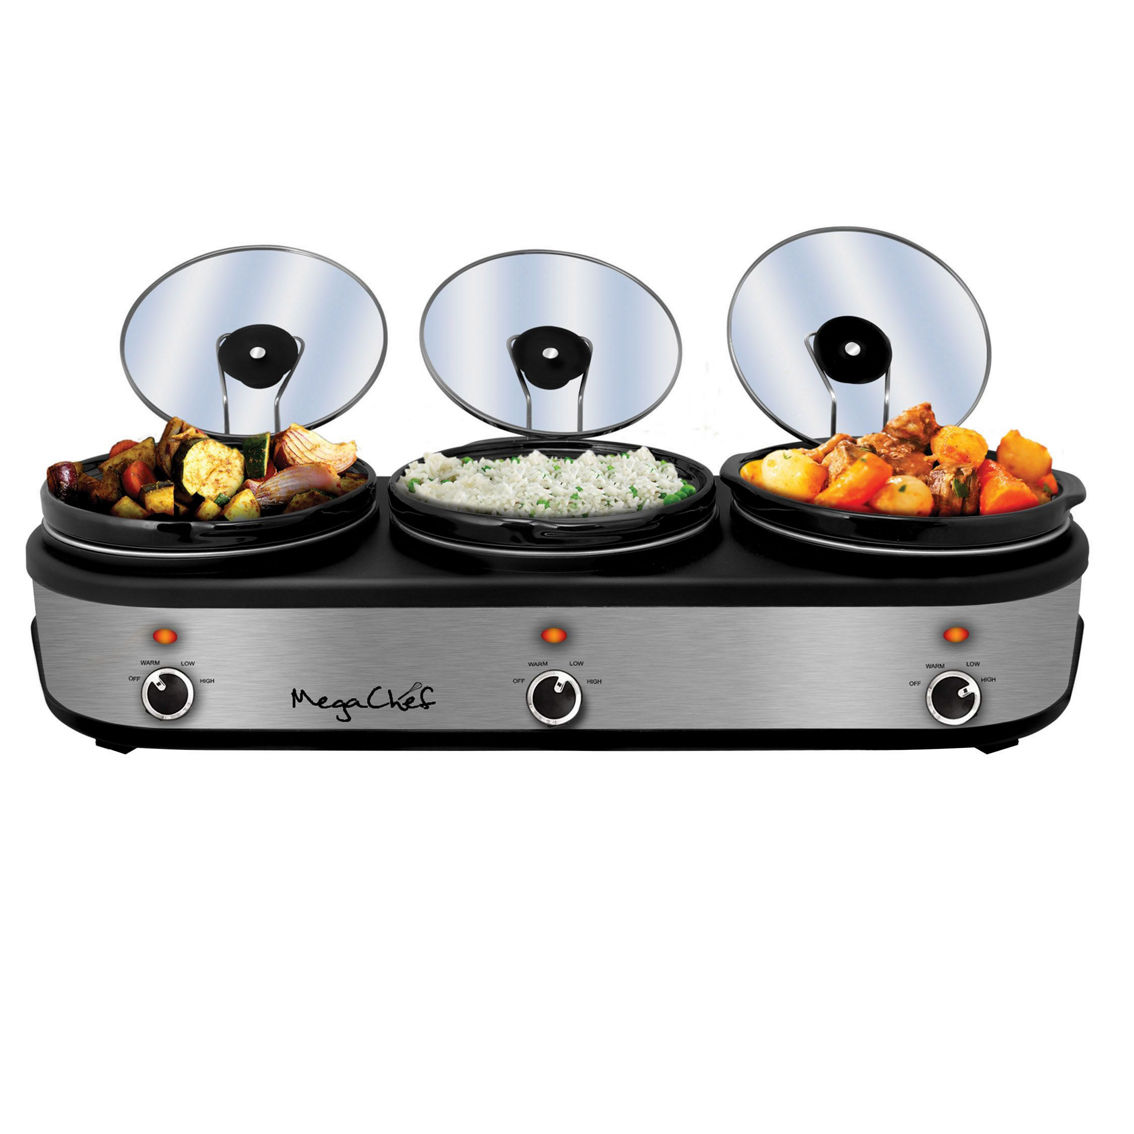 MegaChef Triple 2.5 Quart Slow Cooker and Buffet Server in Brushed Silver and Bl